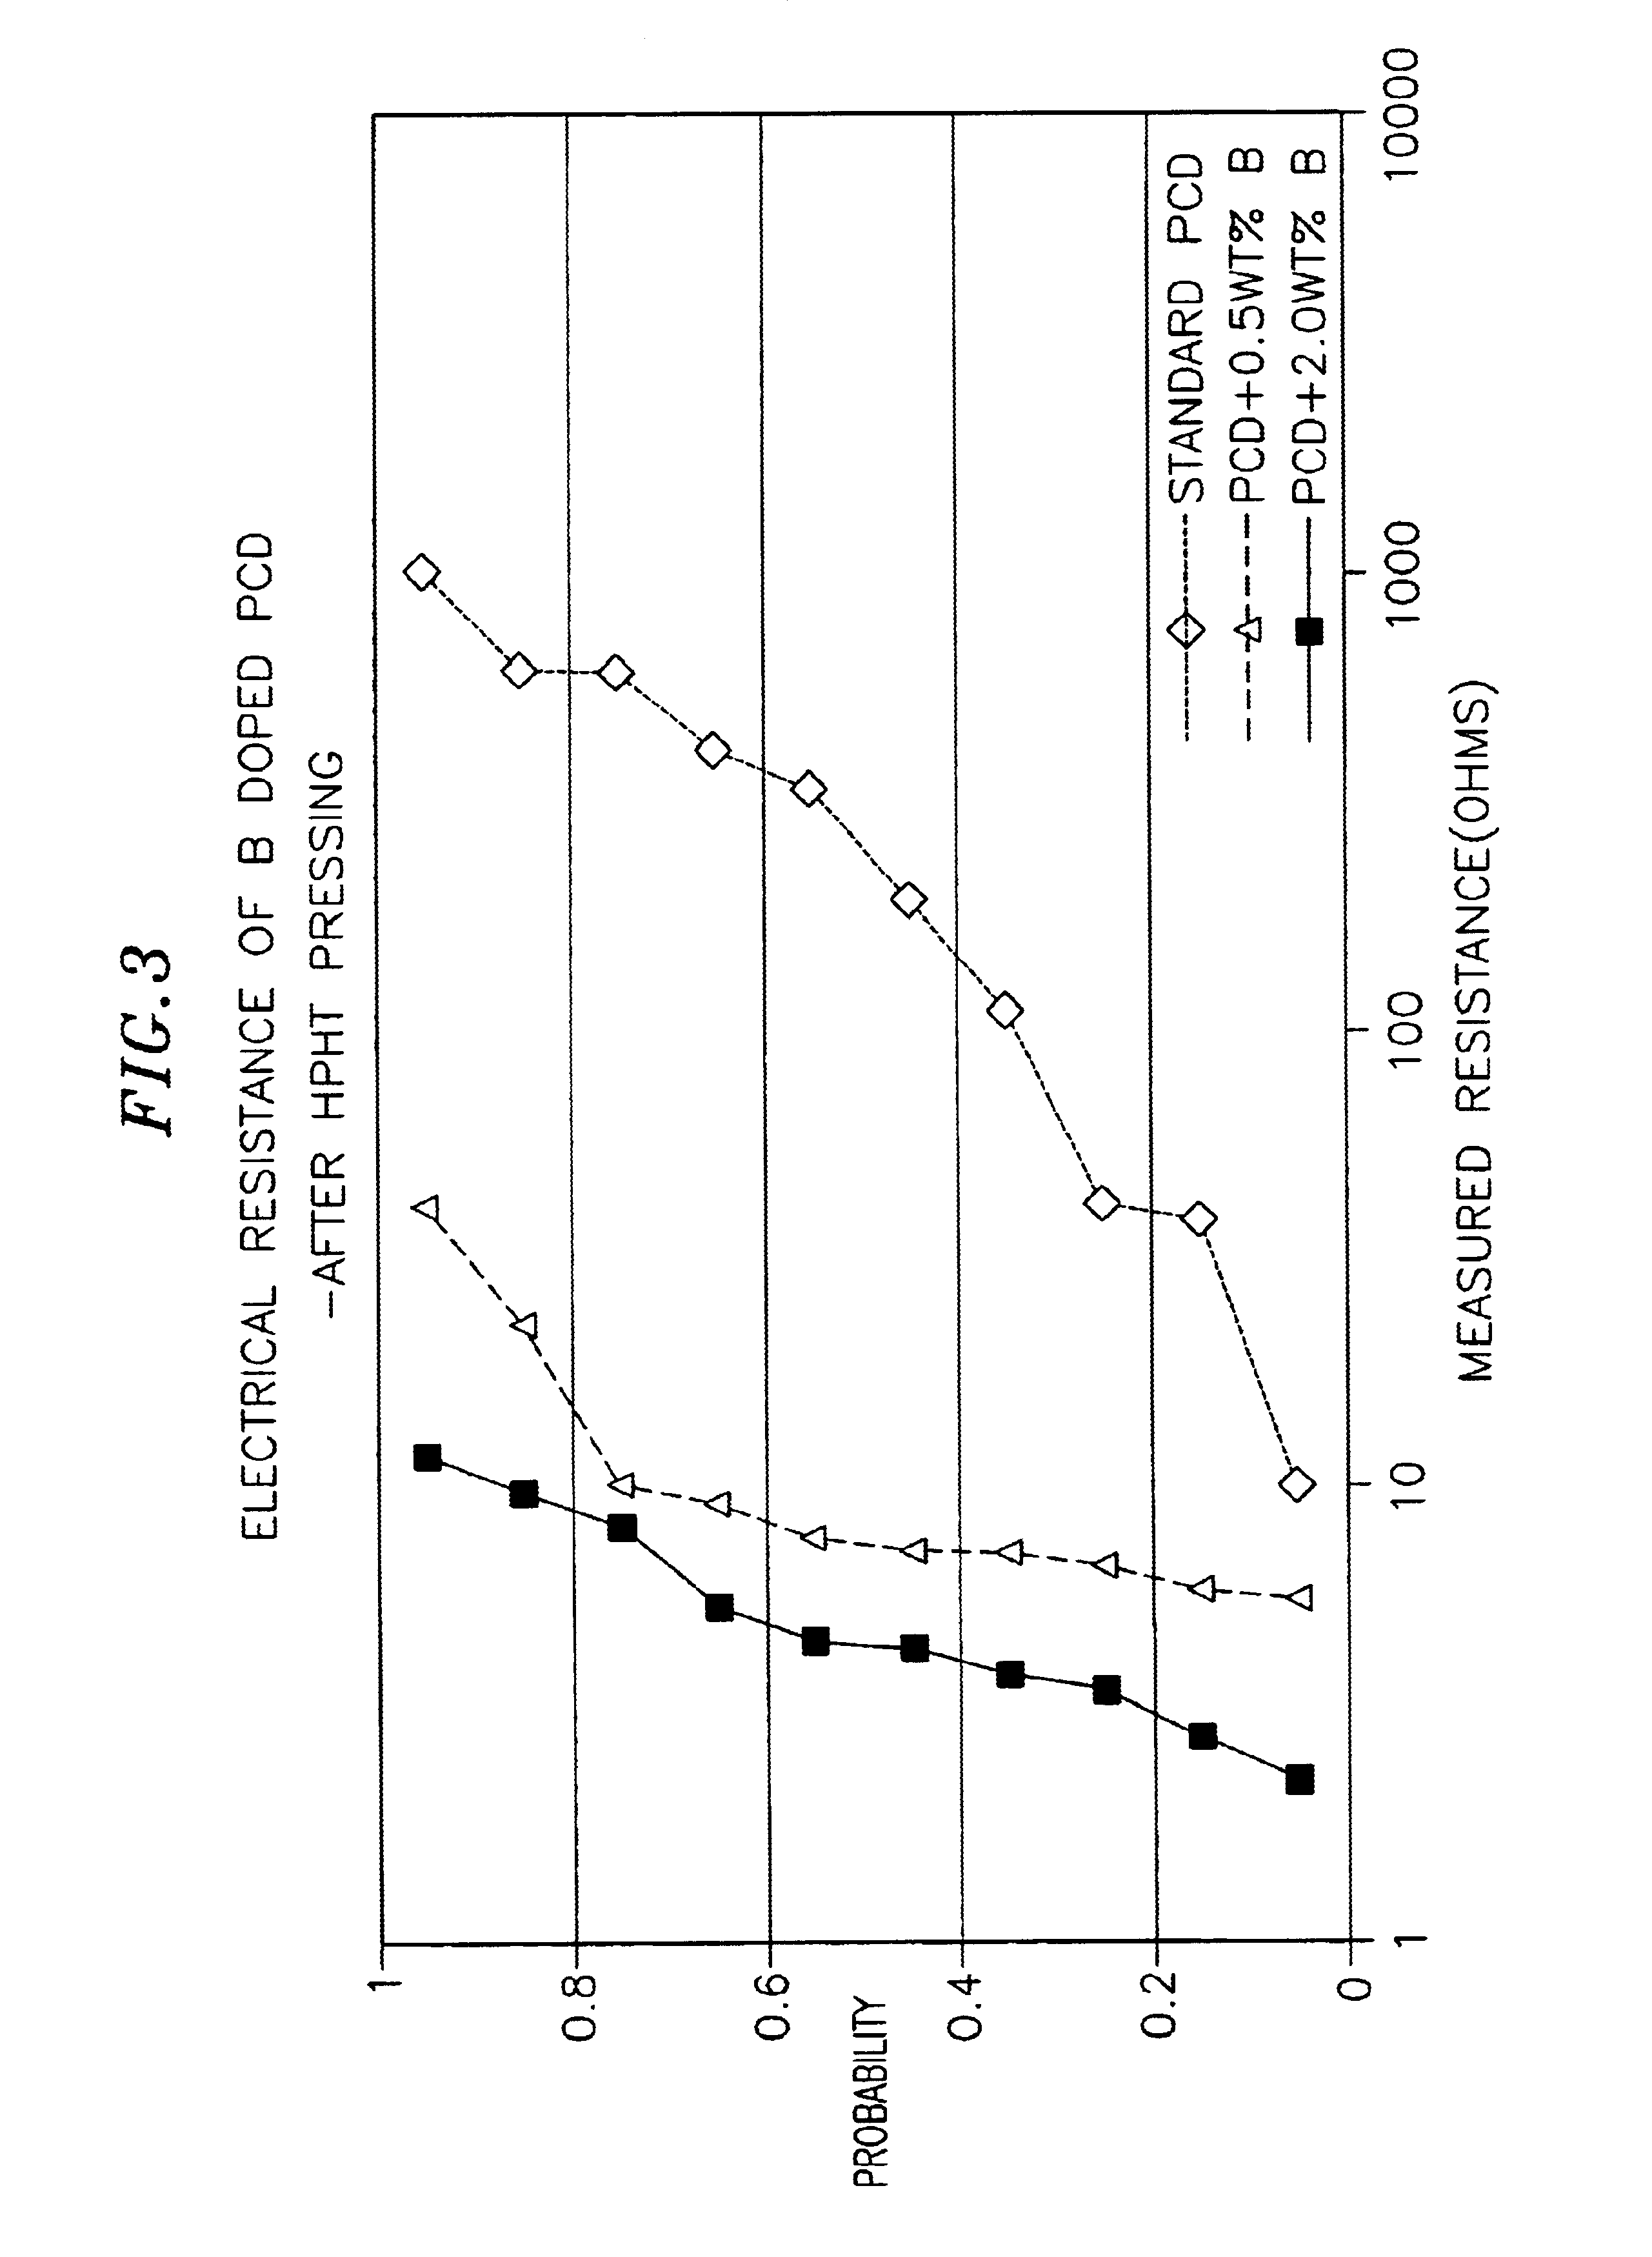 Method of forming cutting elements